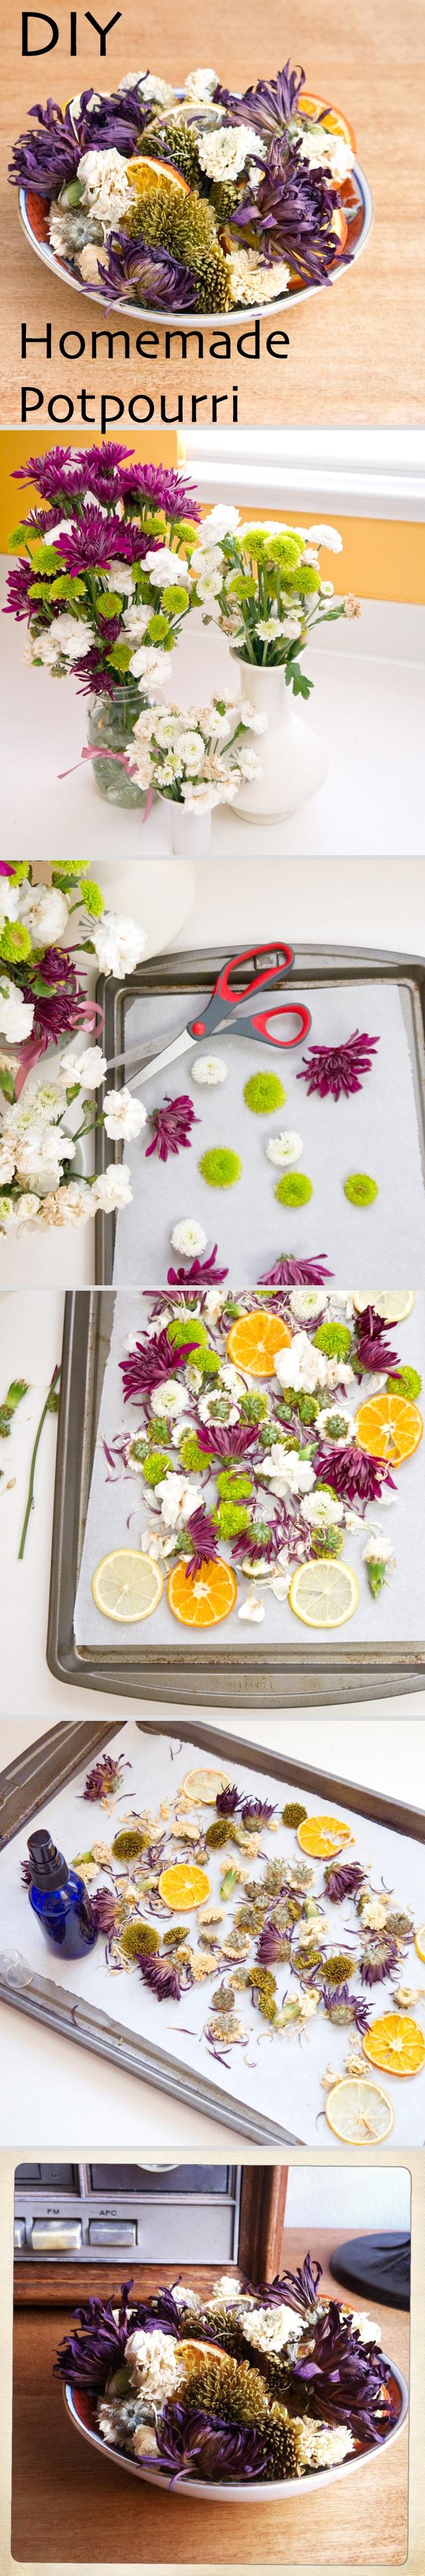 Hochzeit - Don't Toss Those Flowers! How To Make Homemade Potpourri